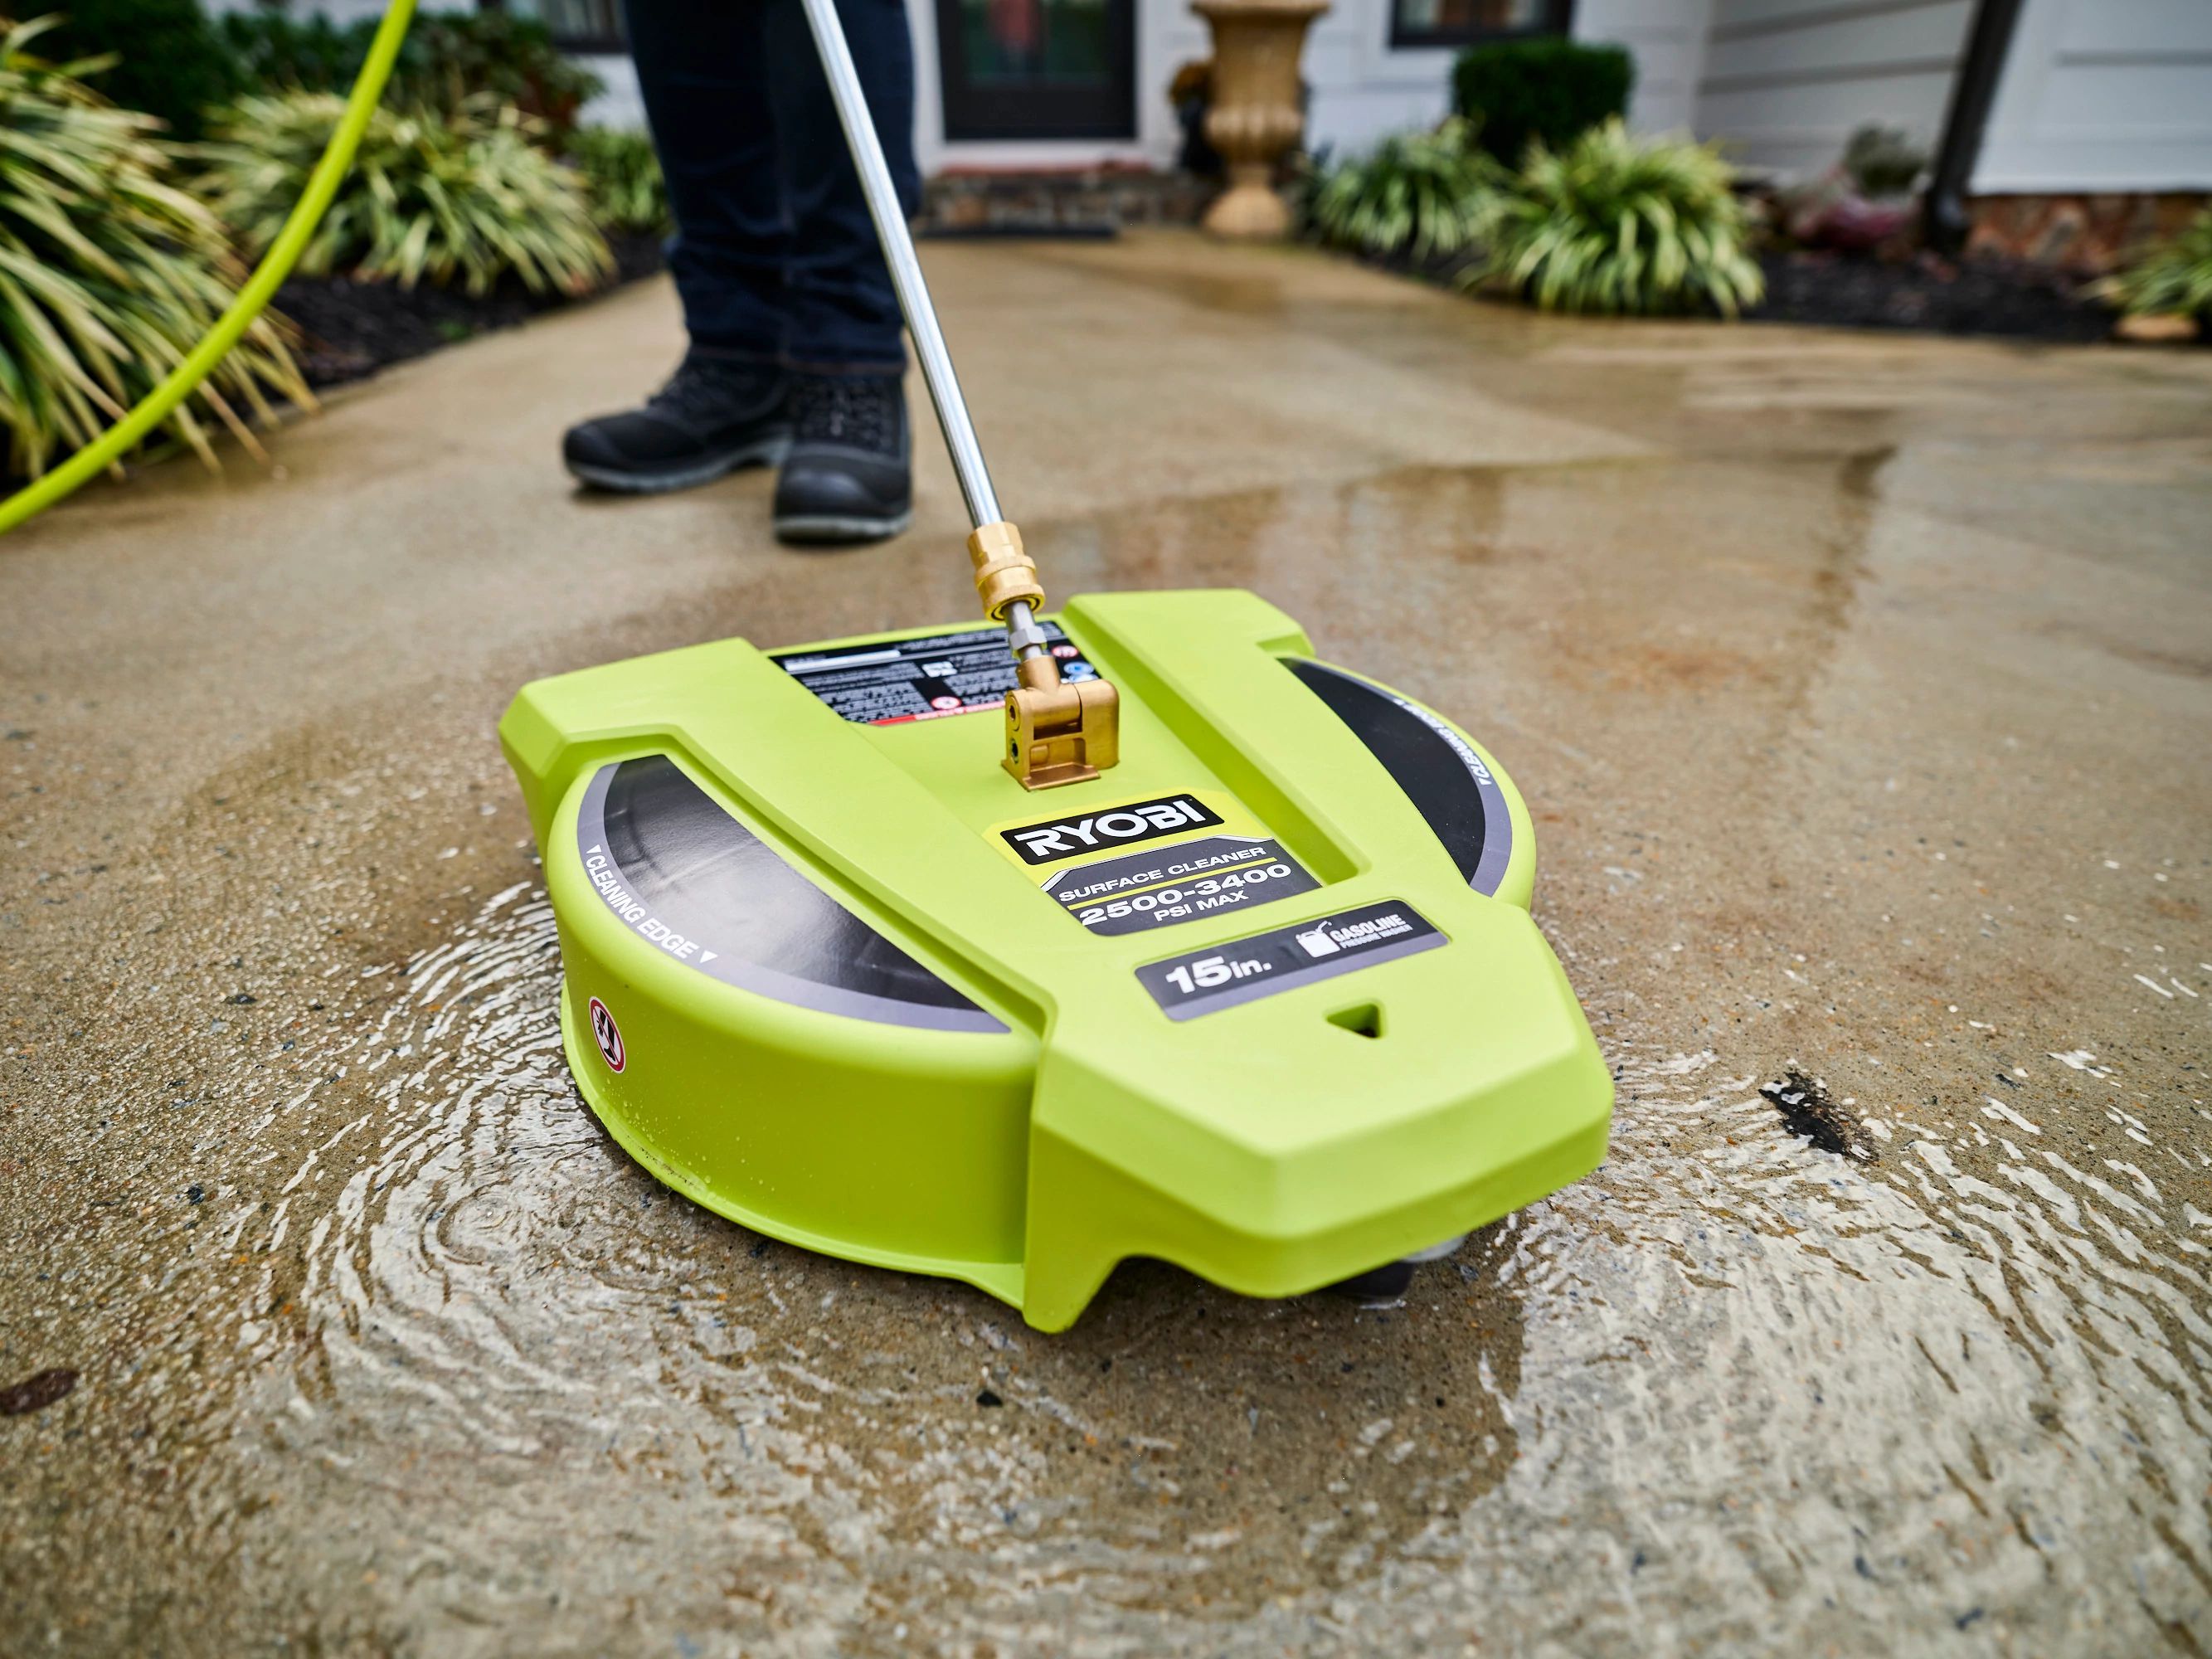 Compatible with Most Gas Pressure Washer Brands